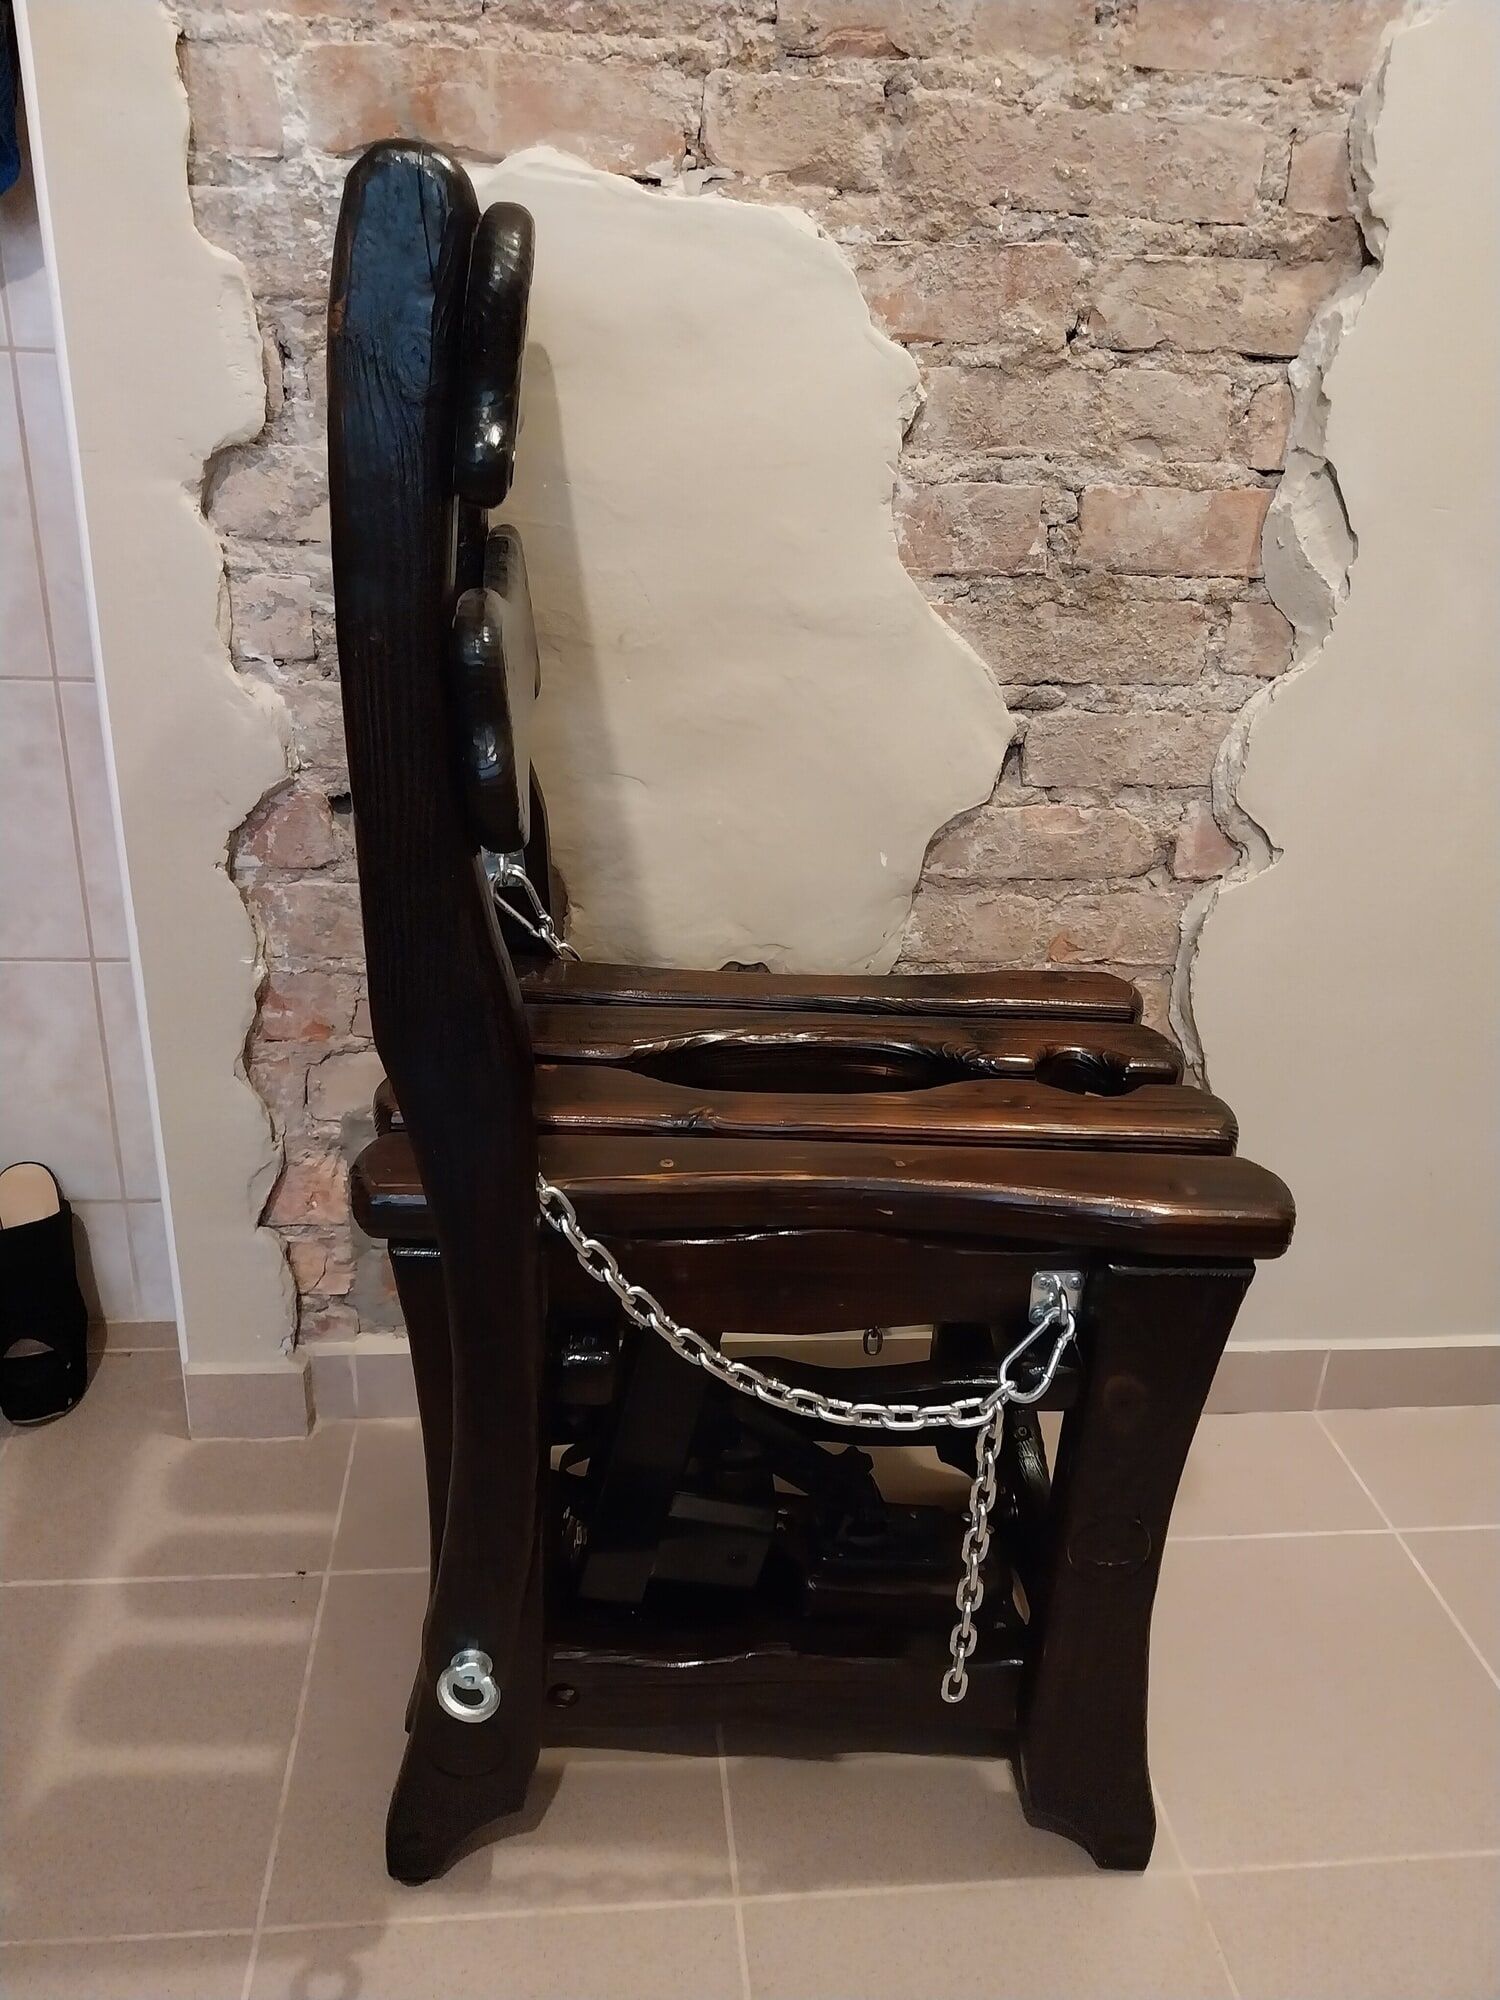 New fuck me chair :)